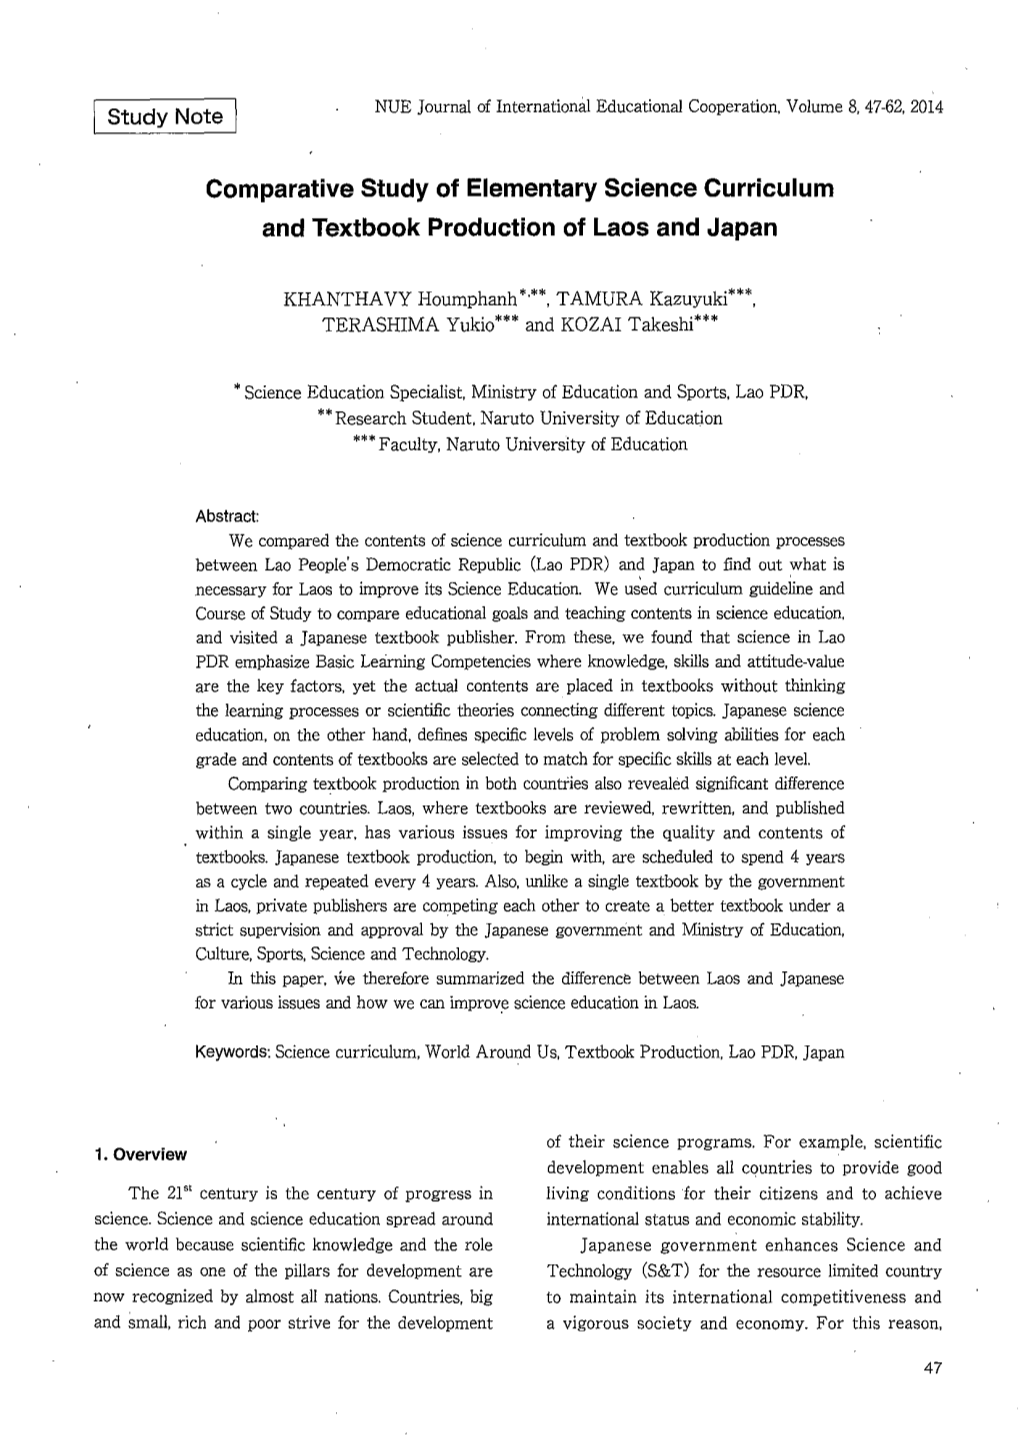 Comparative Study of Elementary Science Curriculum and Textbook Production of Laos and Japan